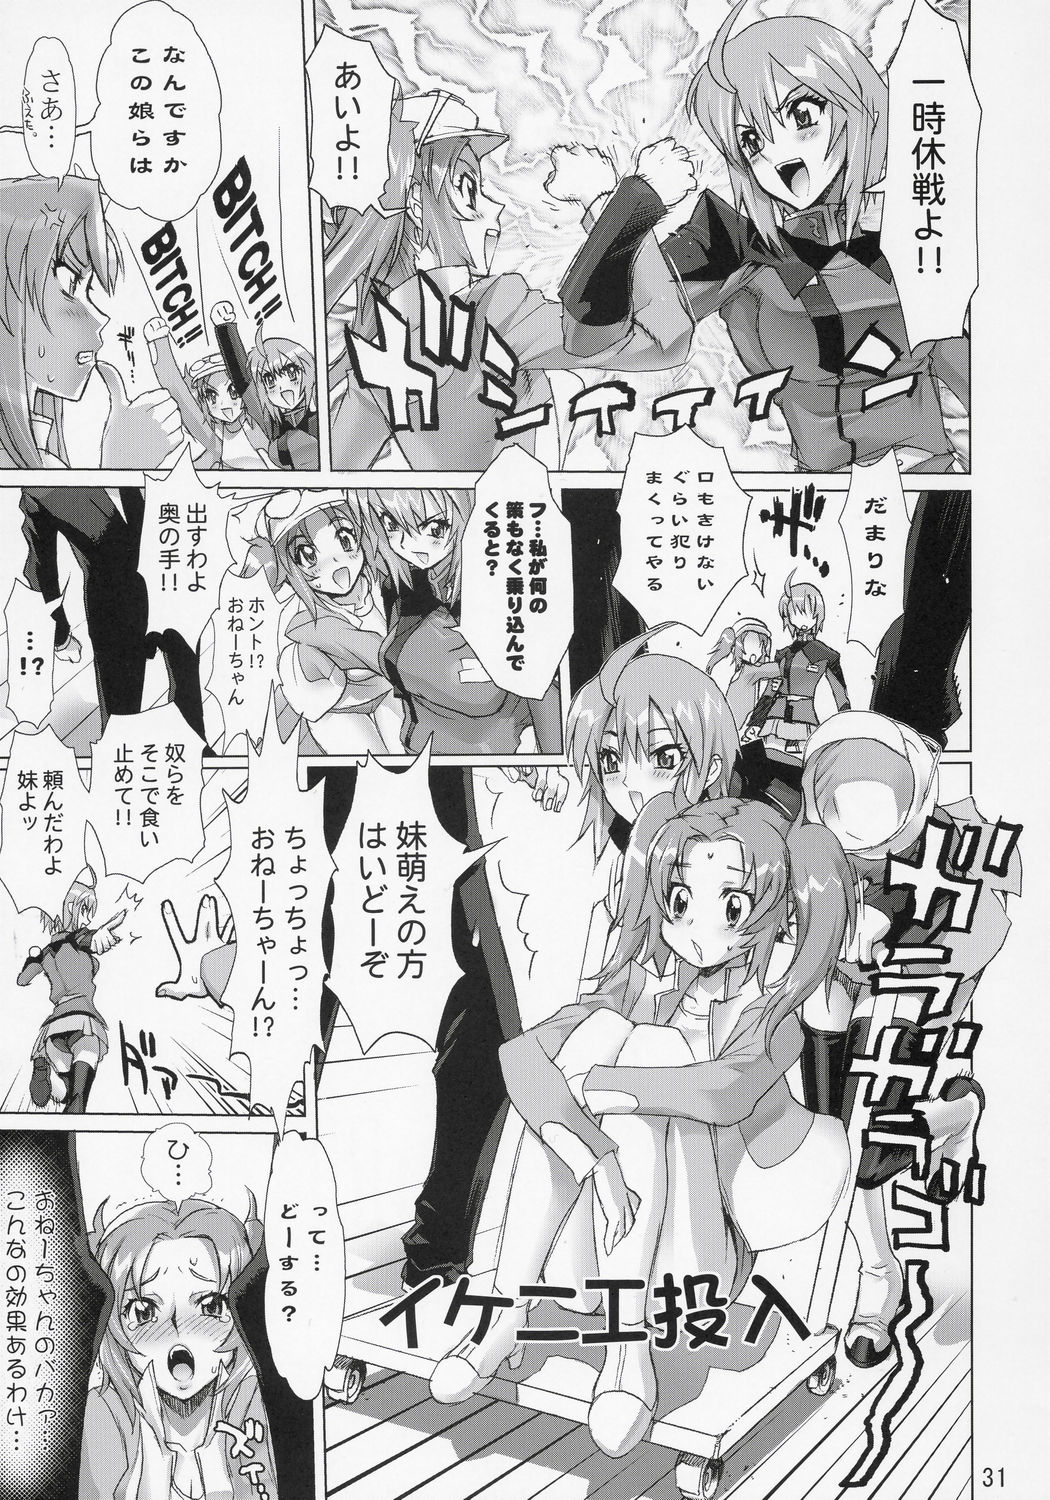 (C69) [Digital Accel Works] Inazuma Warrior 2 (Various) page 30 full